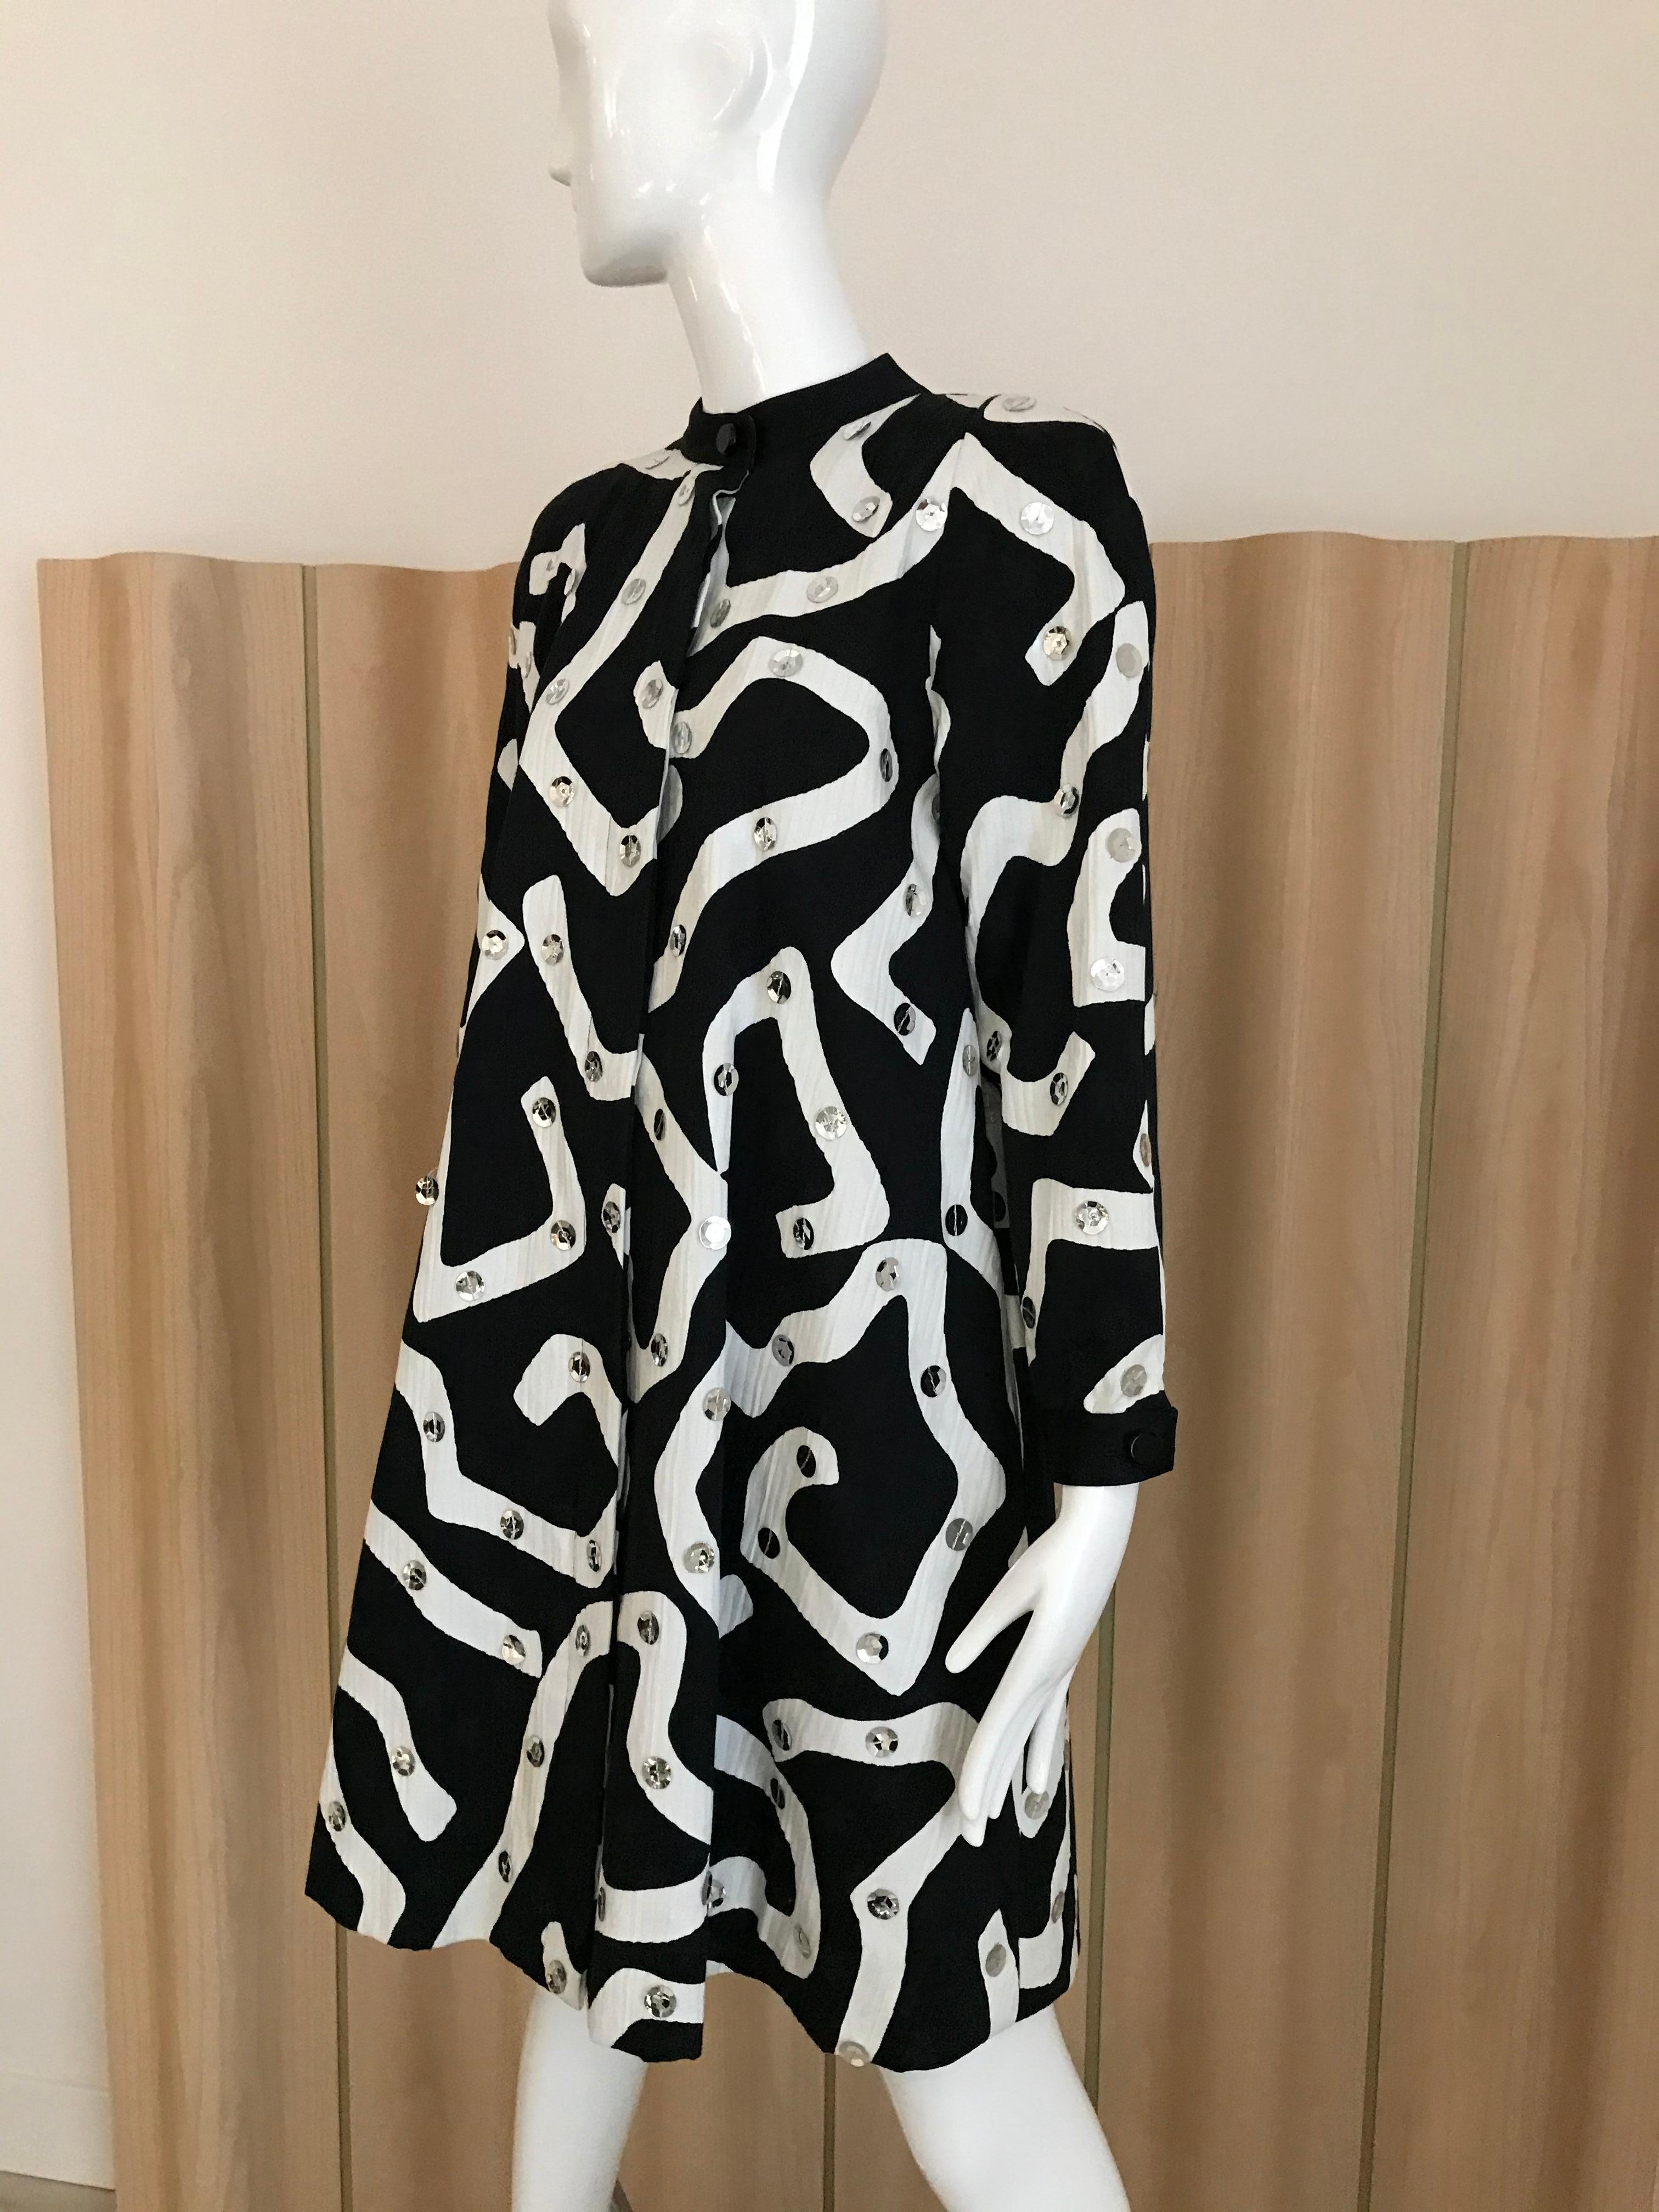 Black 1980s Geoffrey Beene Blaack and White Abstract Print Cotton Dress